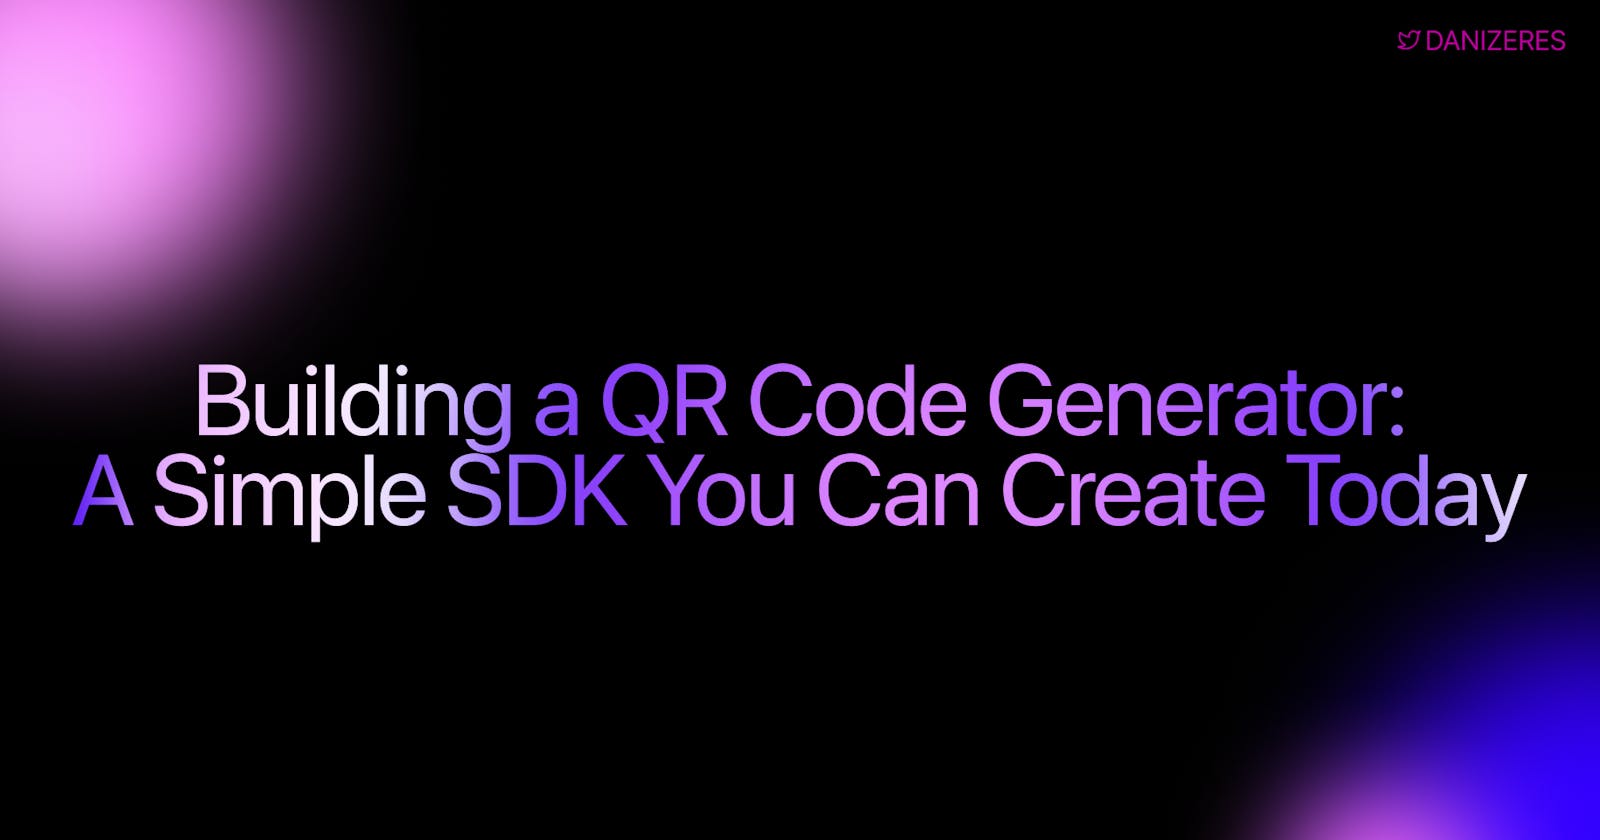 Building a QR Code Generator: A Simple SDK You Can Create Today